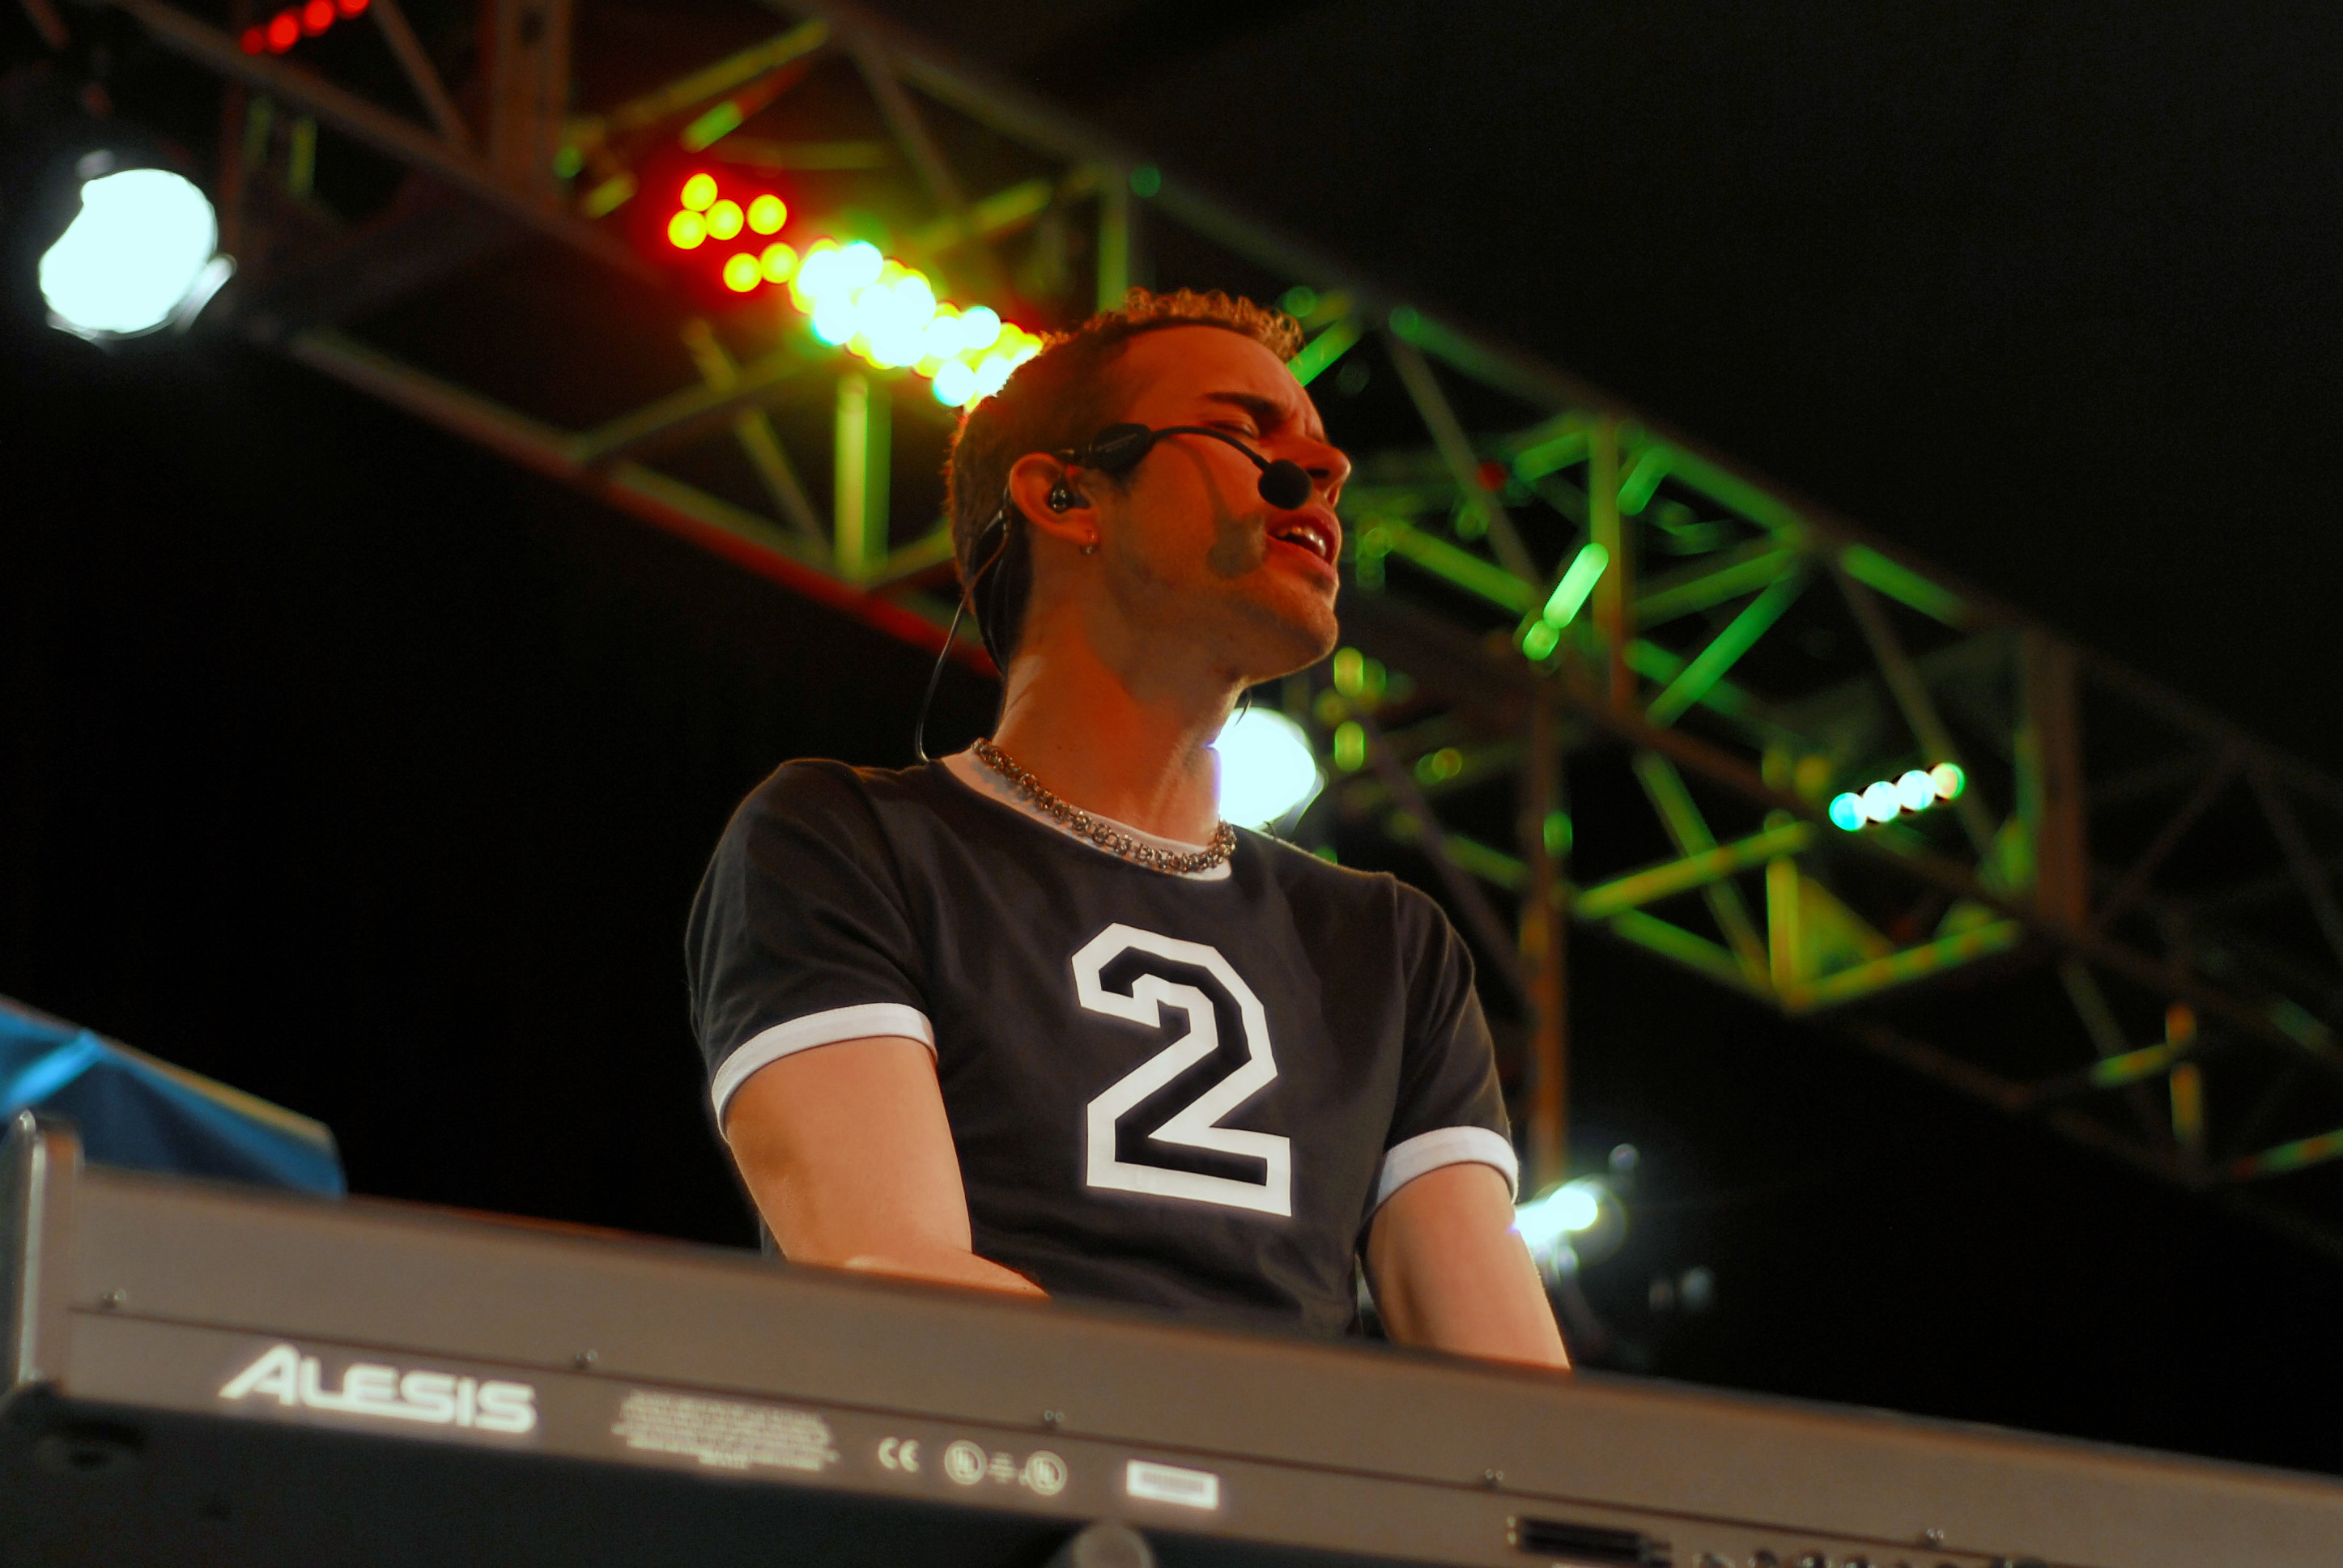 On Stage at FC 2013